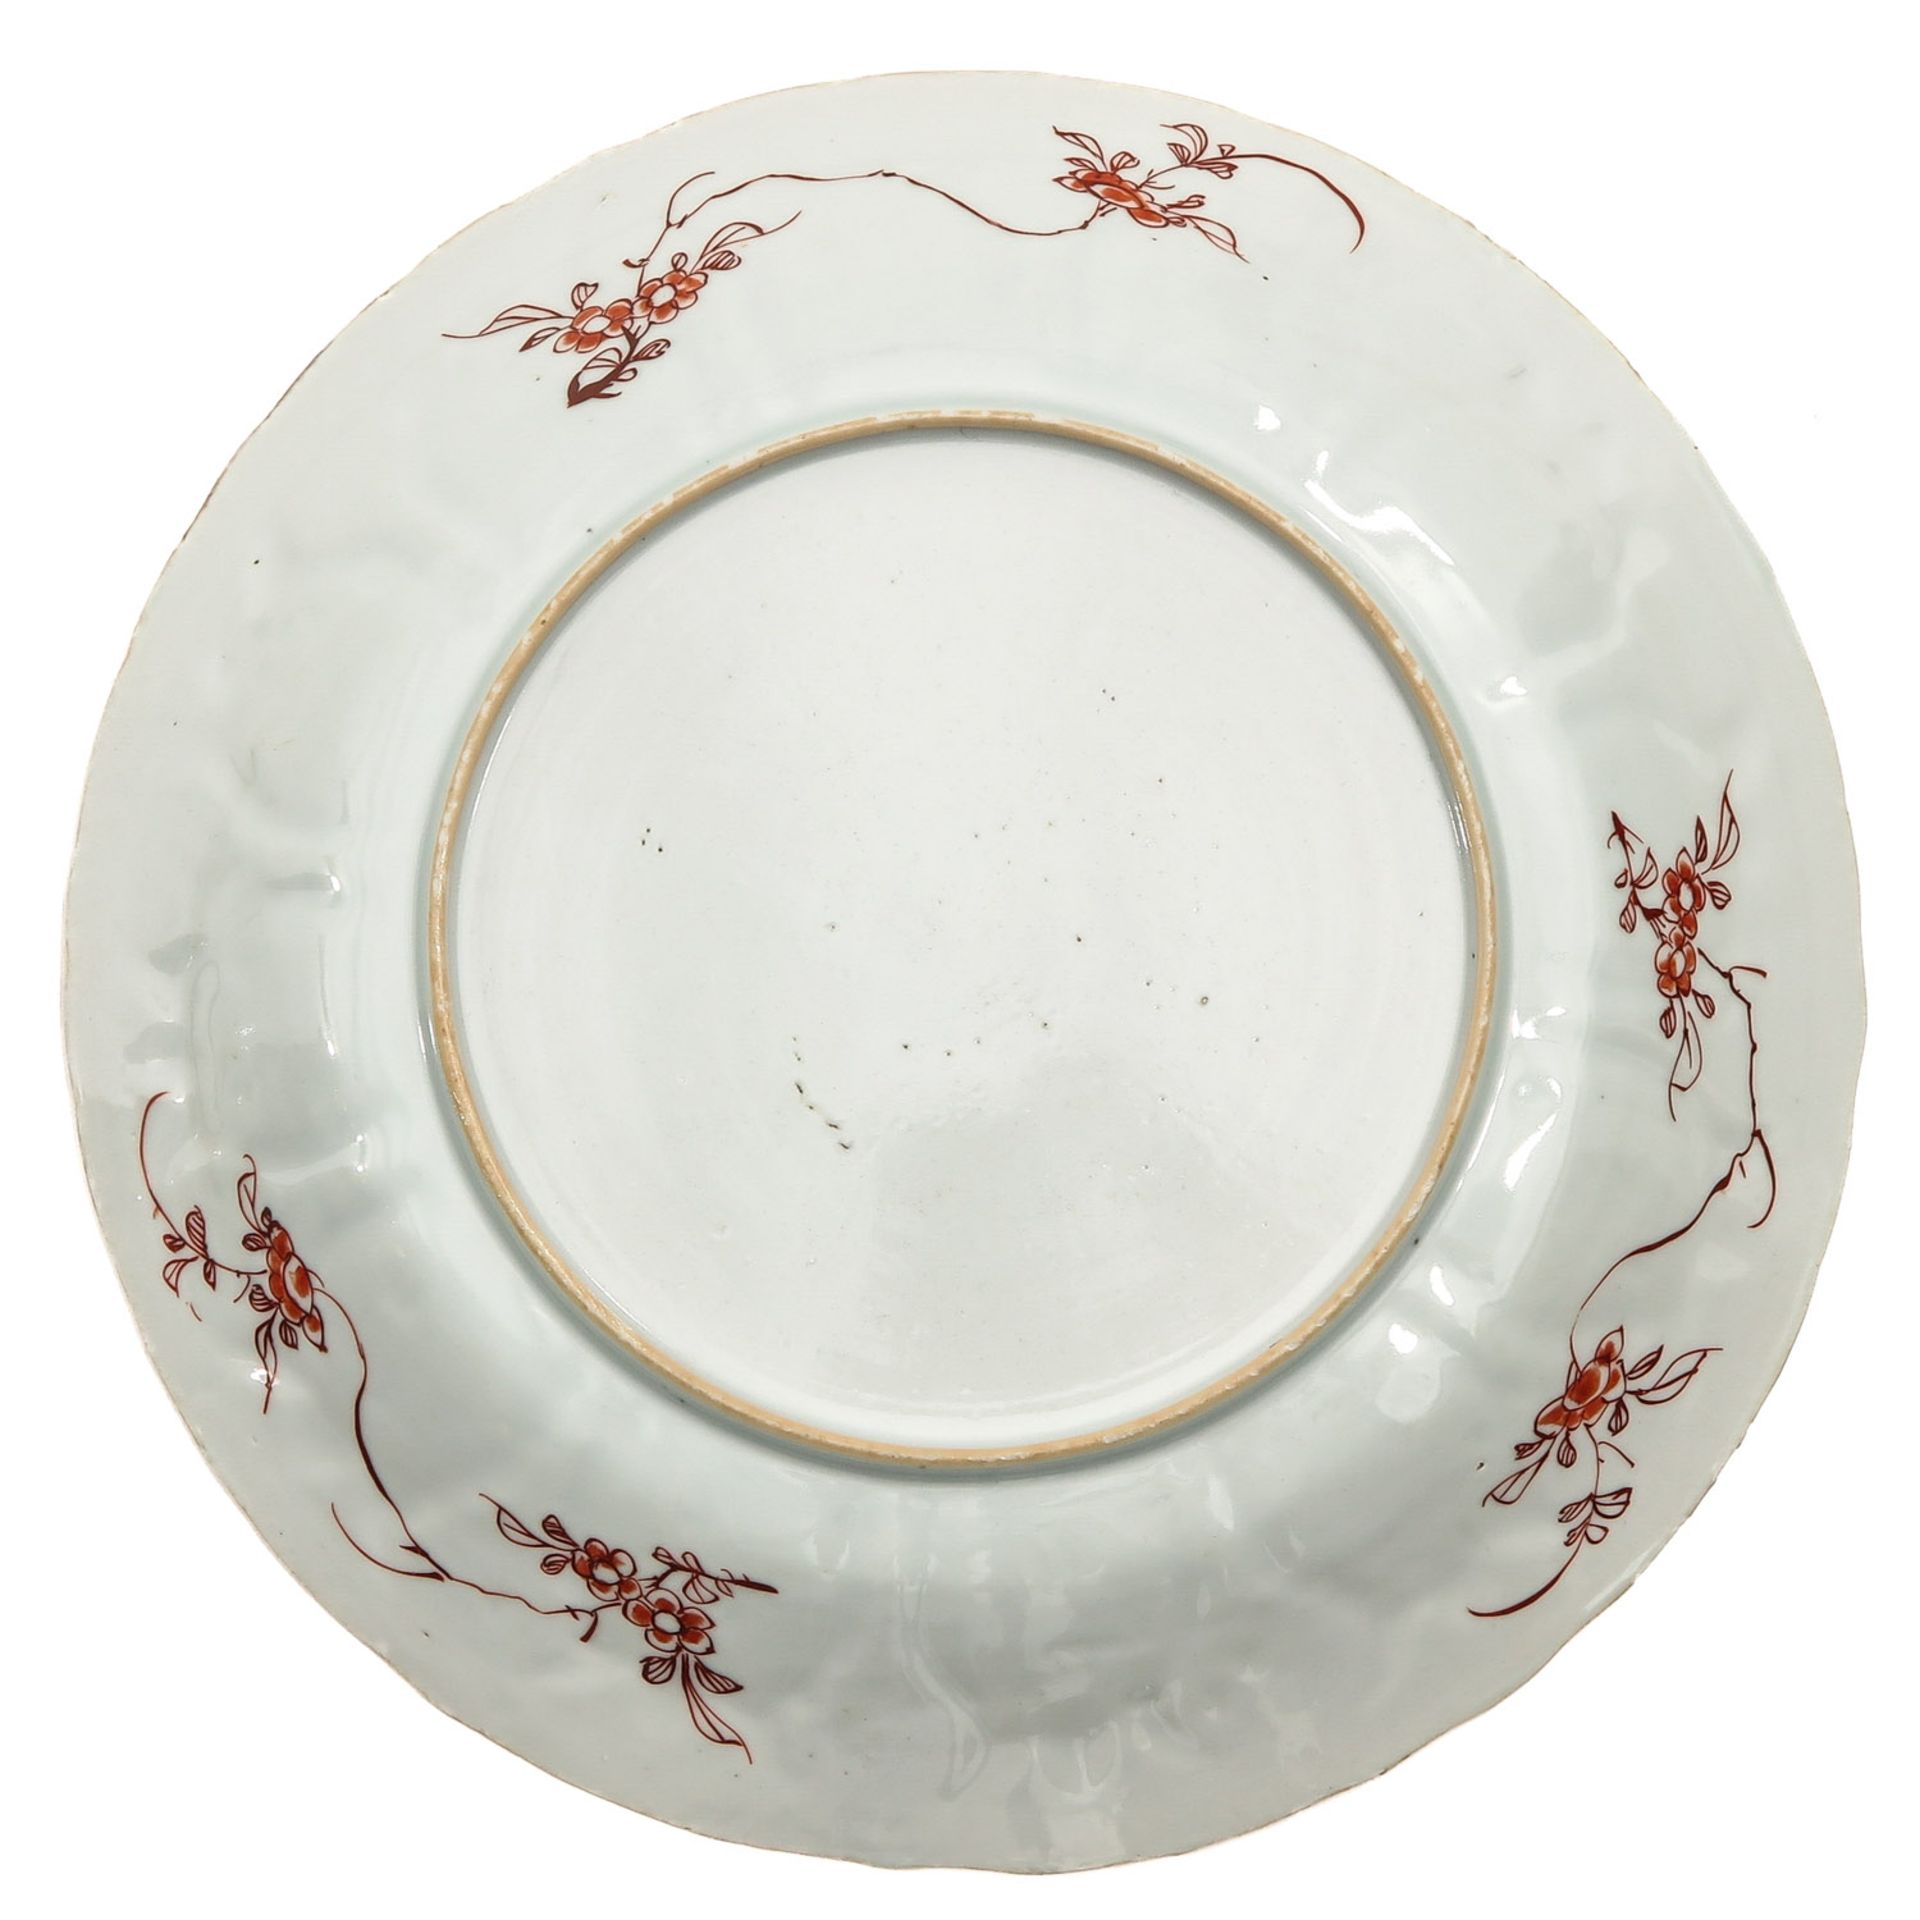 A Series of 3 Iron Red and Gilt Decorates Plates - Image 8 of 10